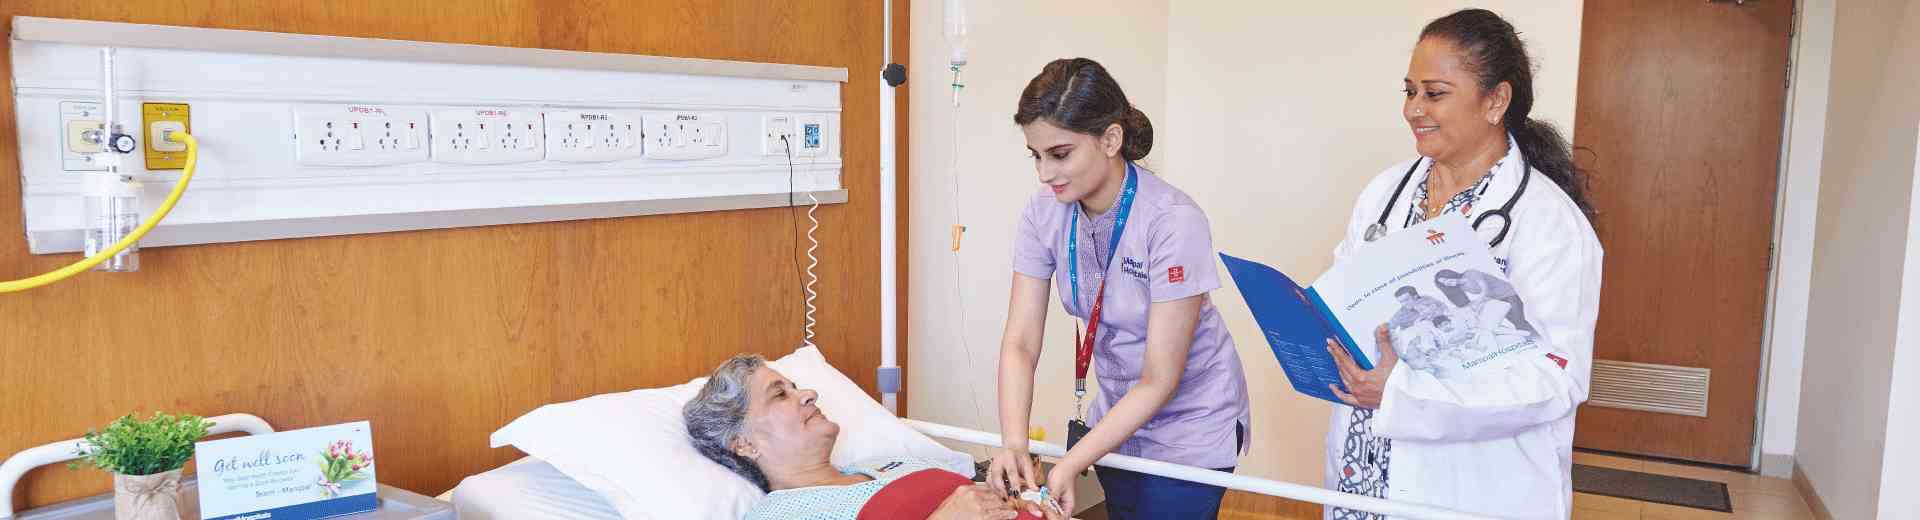 Outpatient Inpatient and Emergency services in Mangalore